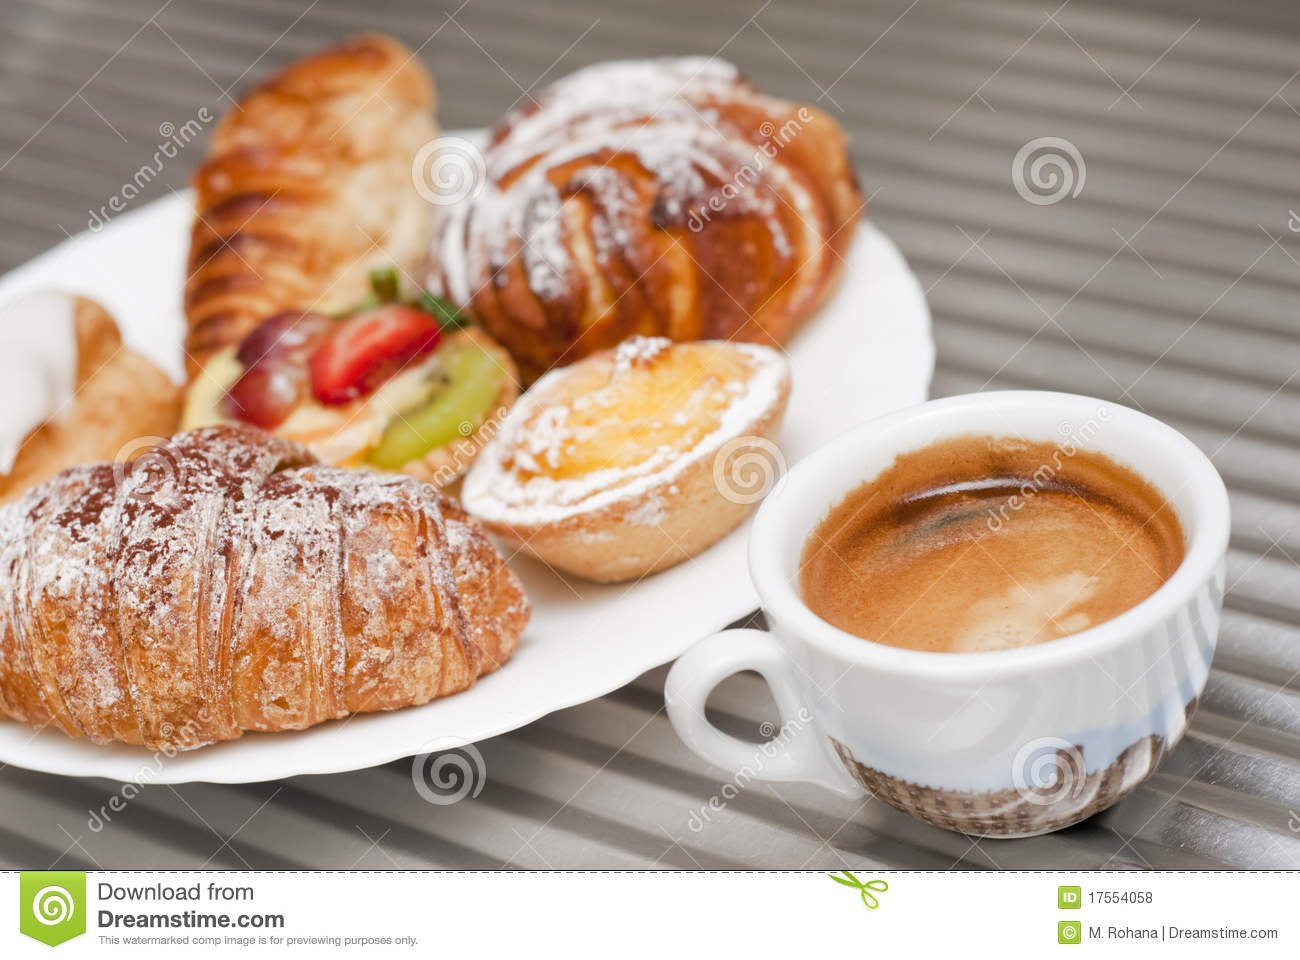 Coffee And Pastry Royalty Free Stock Photos   Image  17554058